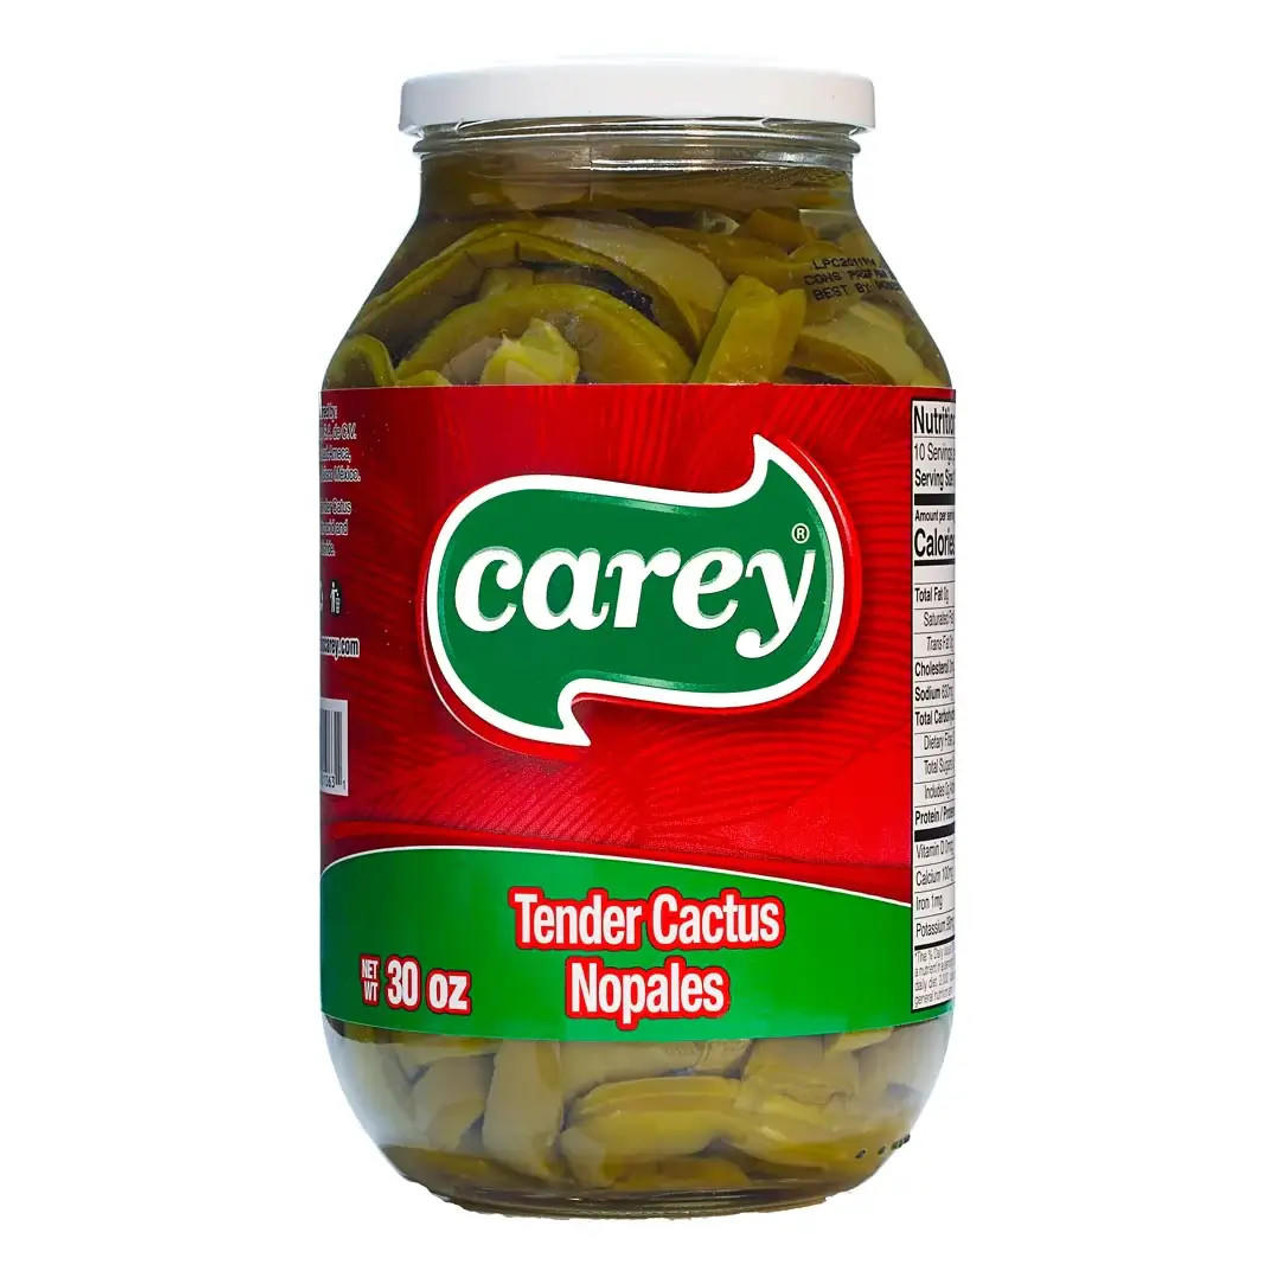  Carey Tender Cactus Nopales 33 oz (12-Case) - Sliced Tender Cactus for Authentic Latin American Dishes 